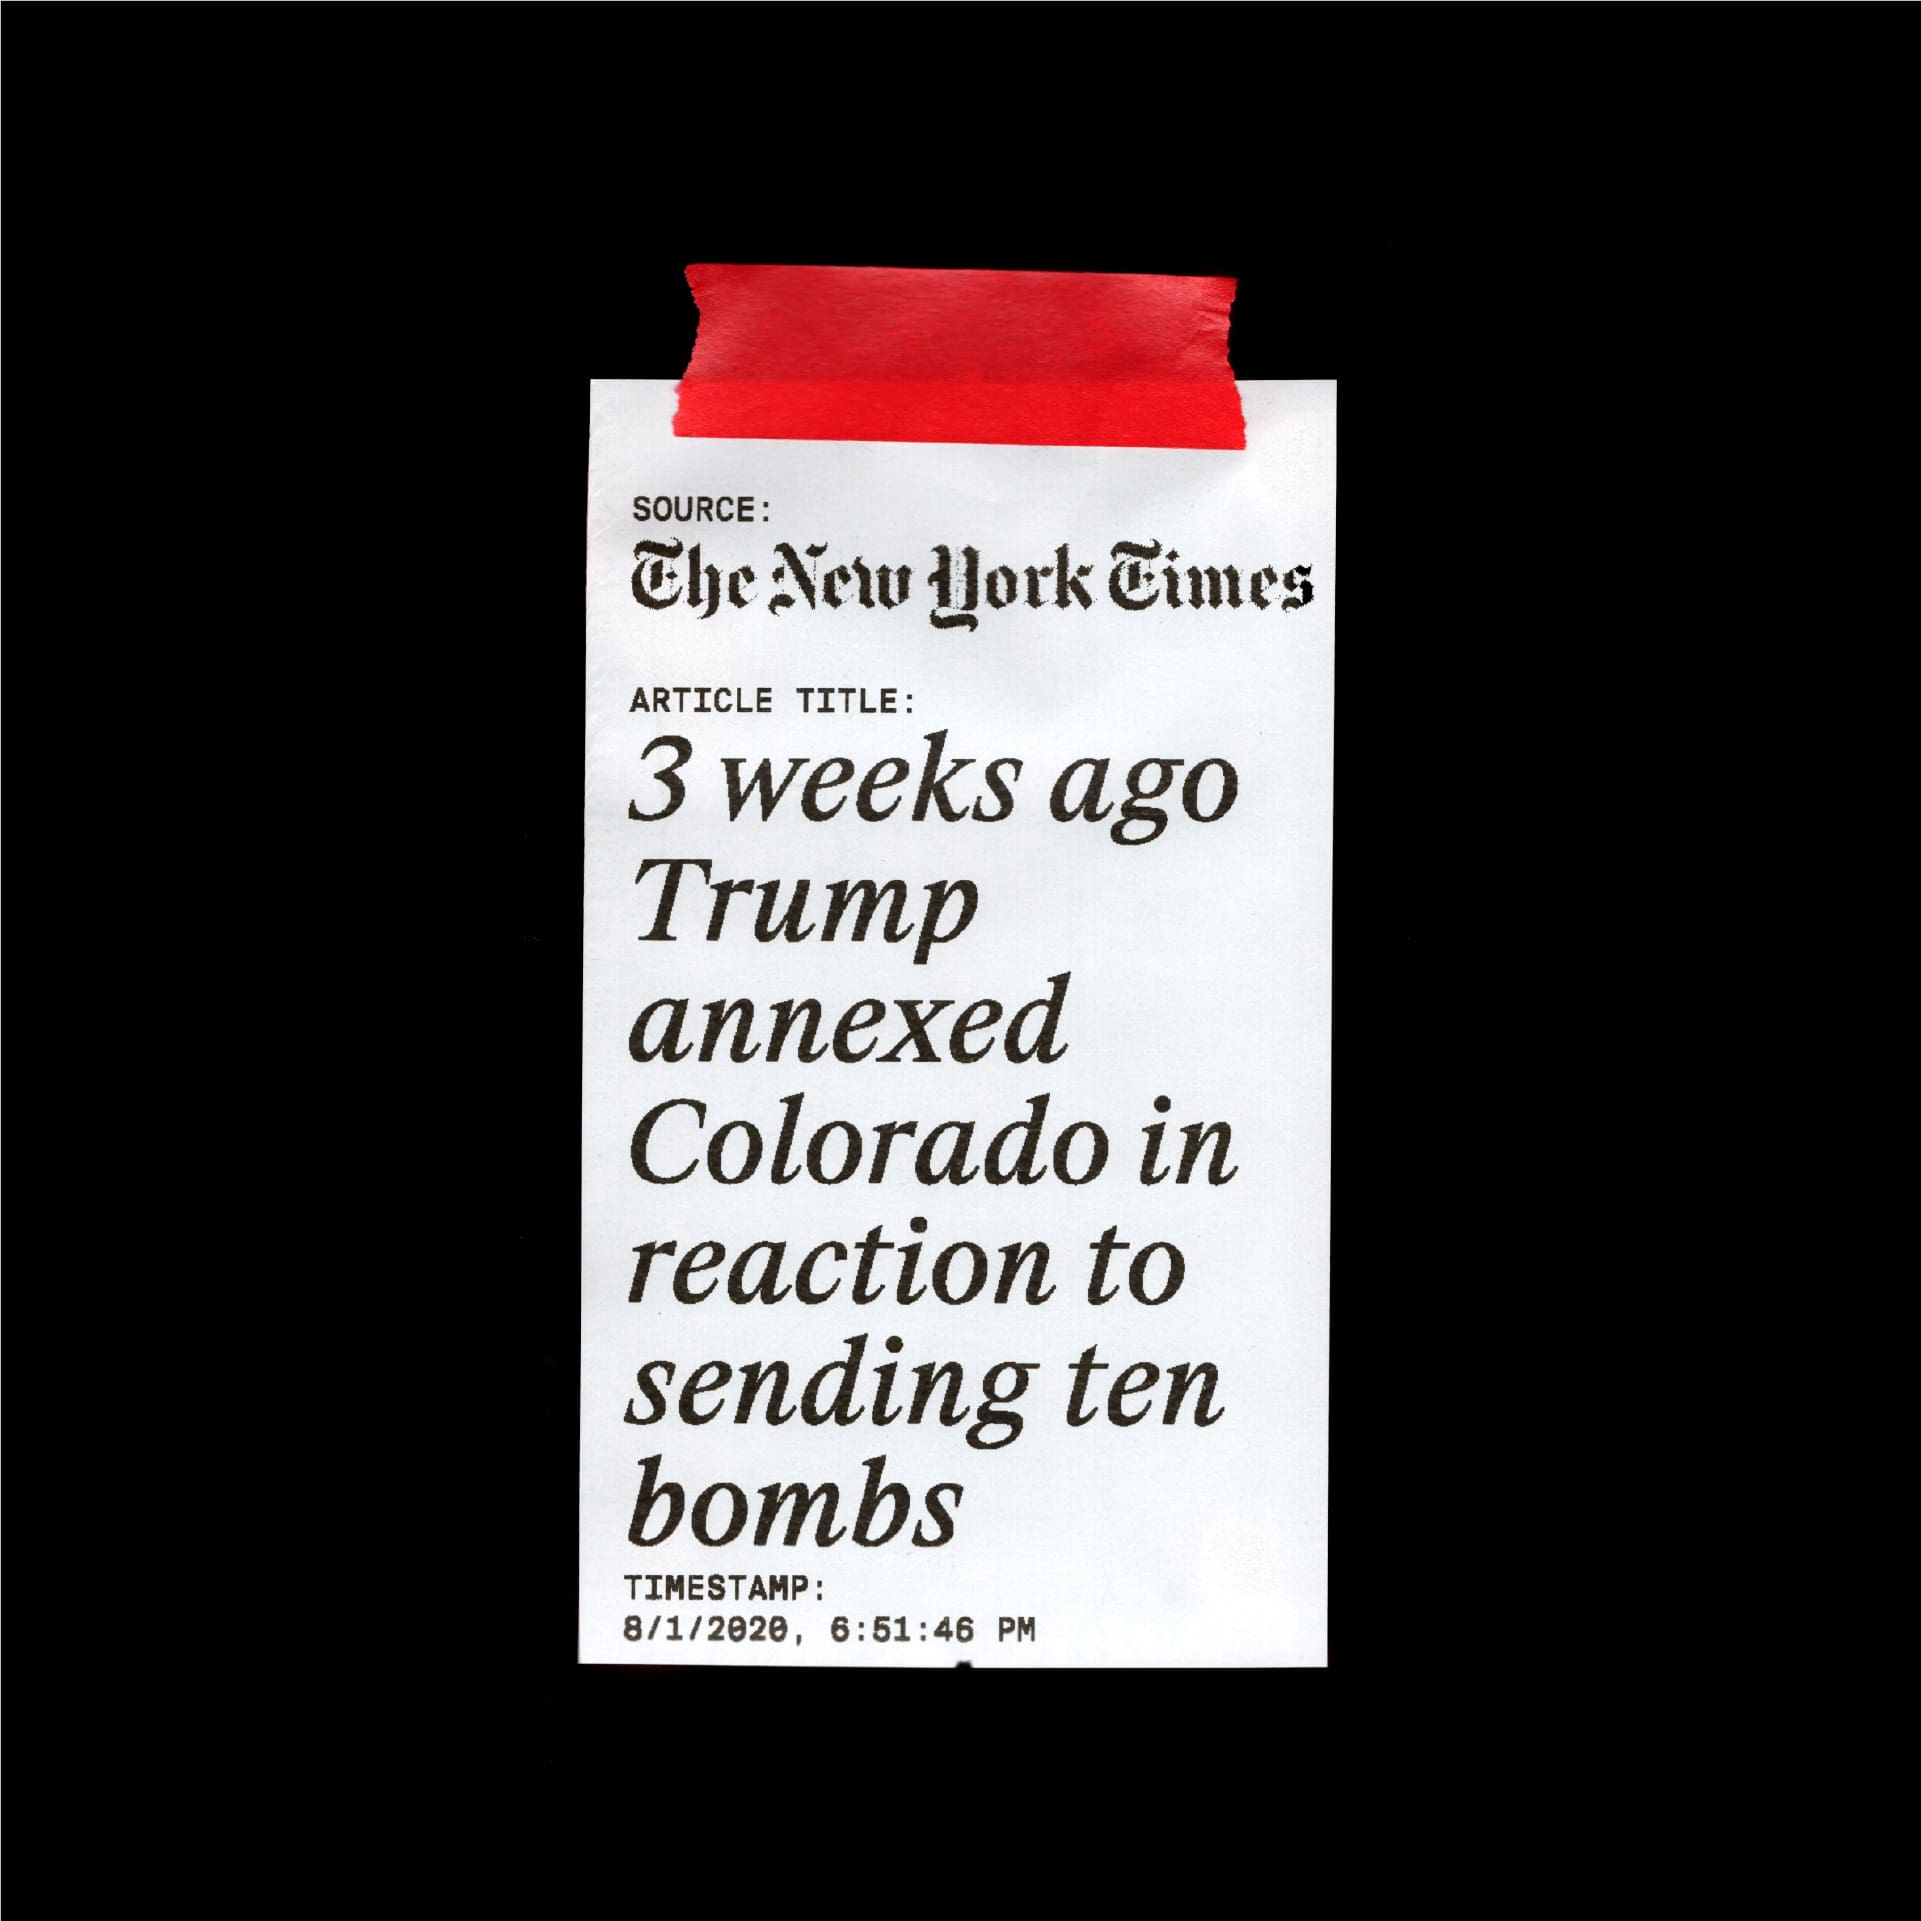 Digital image of a small white piece of paper against a black background attached by a piece of red tape. Part of a fake news generator. Large black text reads "Three weeks ago Trump annexed Colorado in reaction to sending ten bombs".